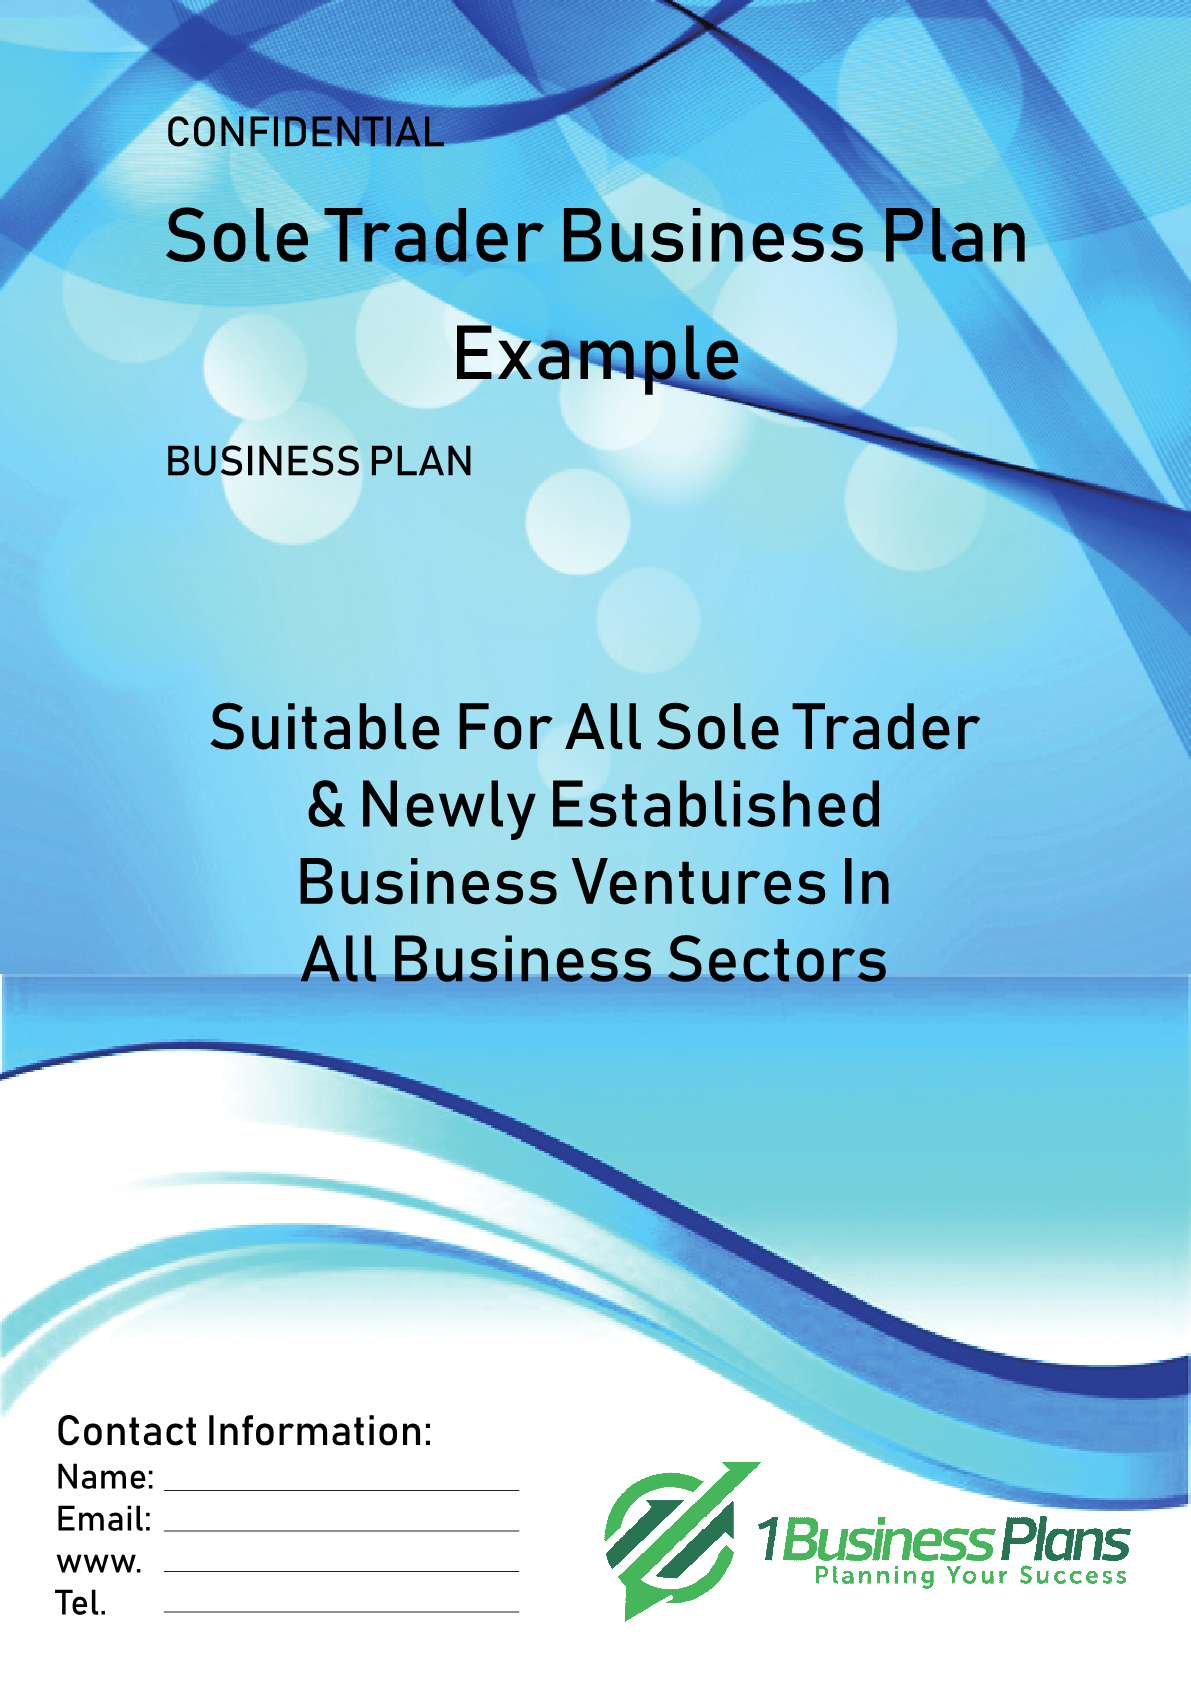 Sole Trader Business Plan Example